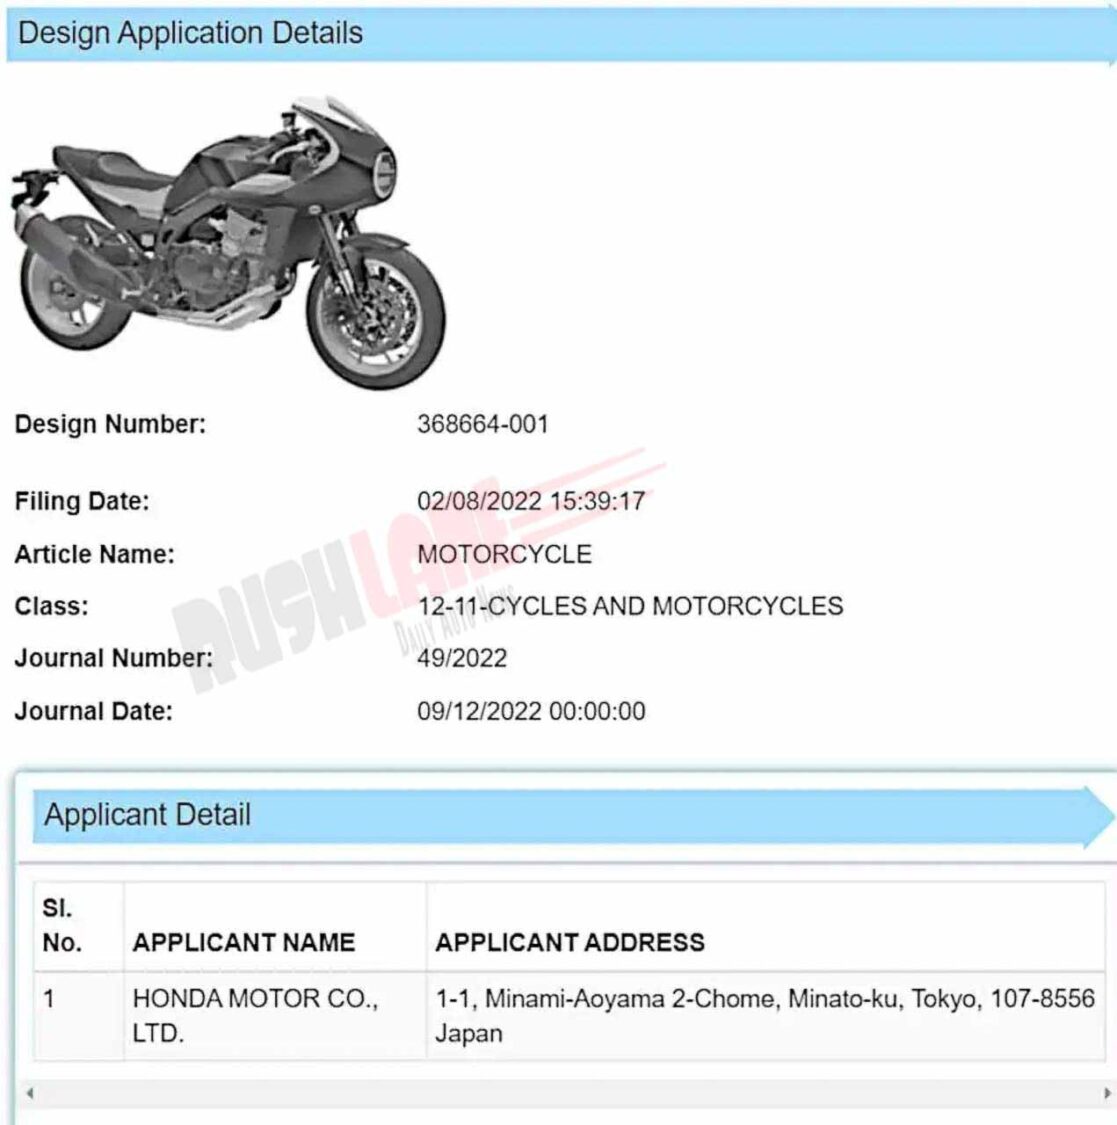 New Honda Hawk 11 Cafe Racer patented in India